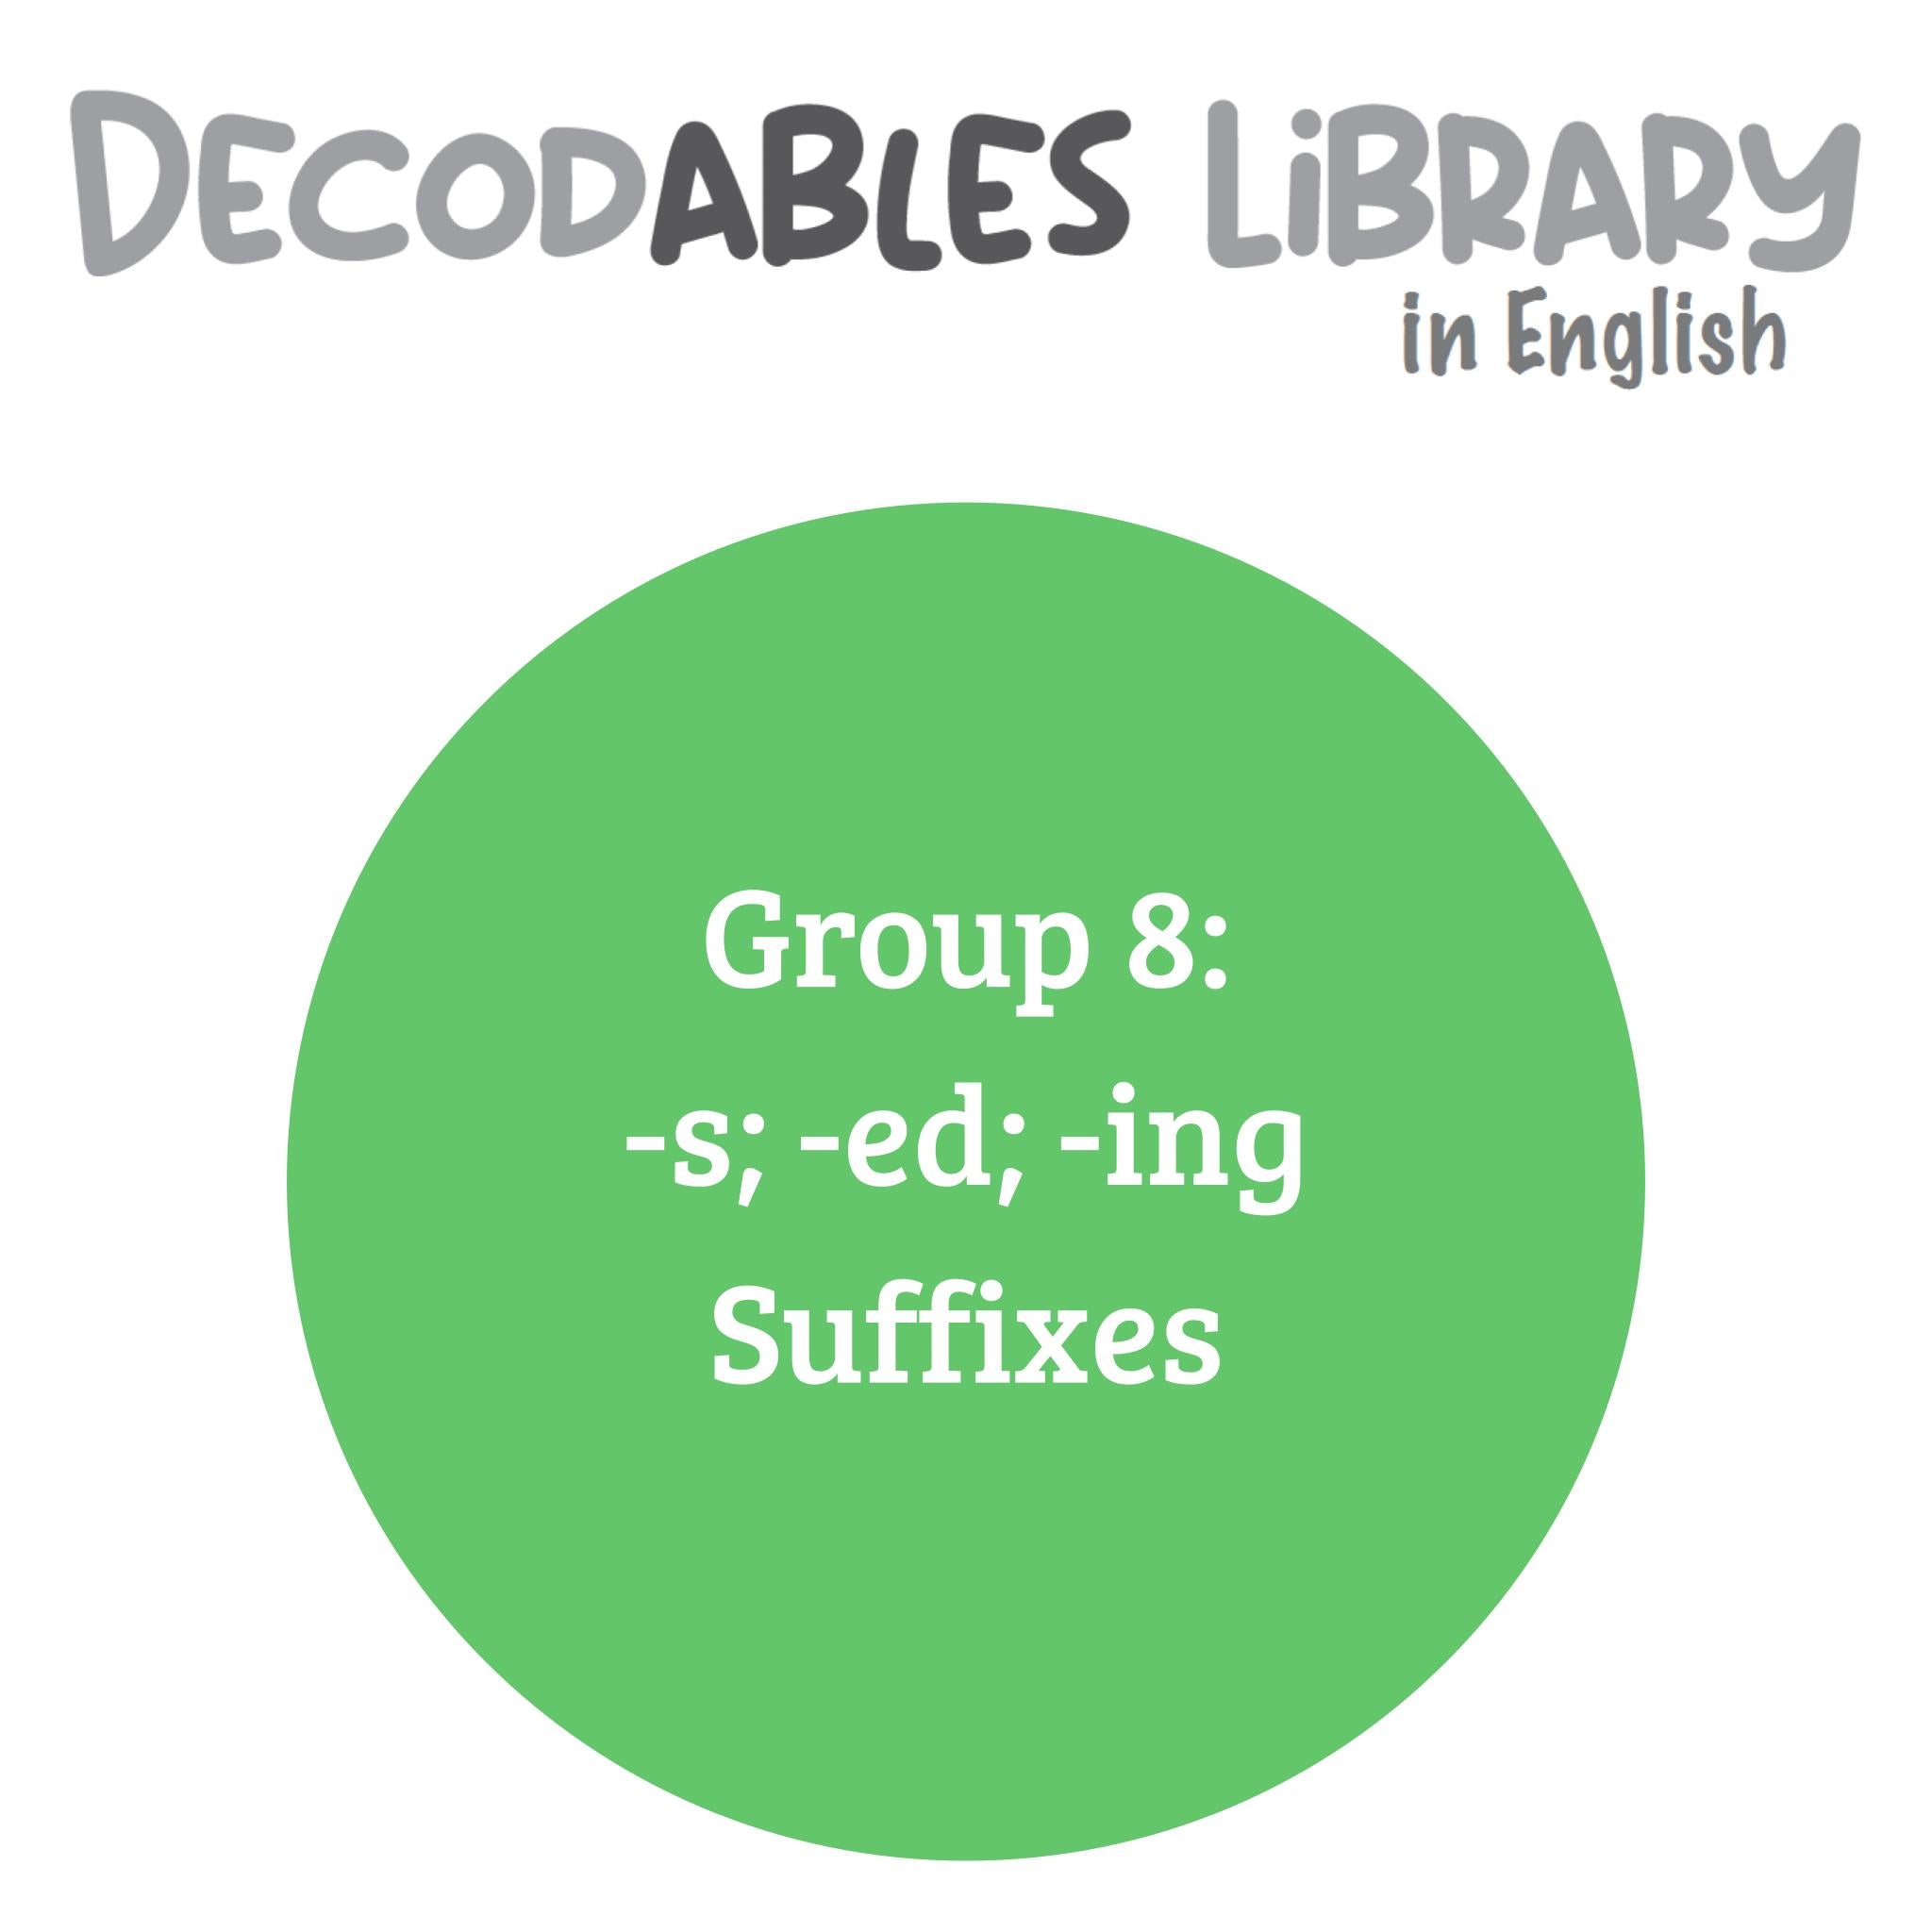 English Decodables Library - Group 8: -s; -ed; -ing Suffixes (set of 6 titles)